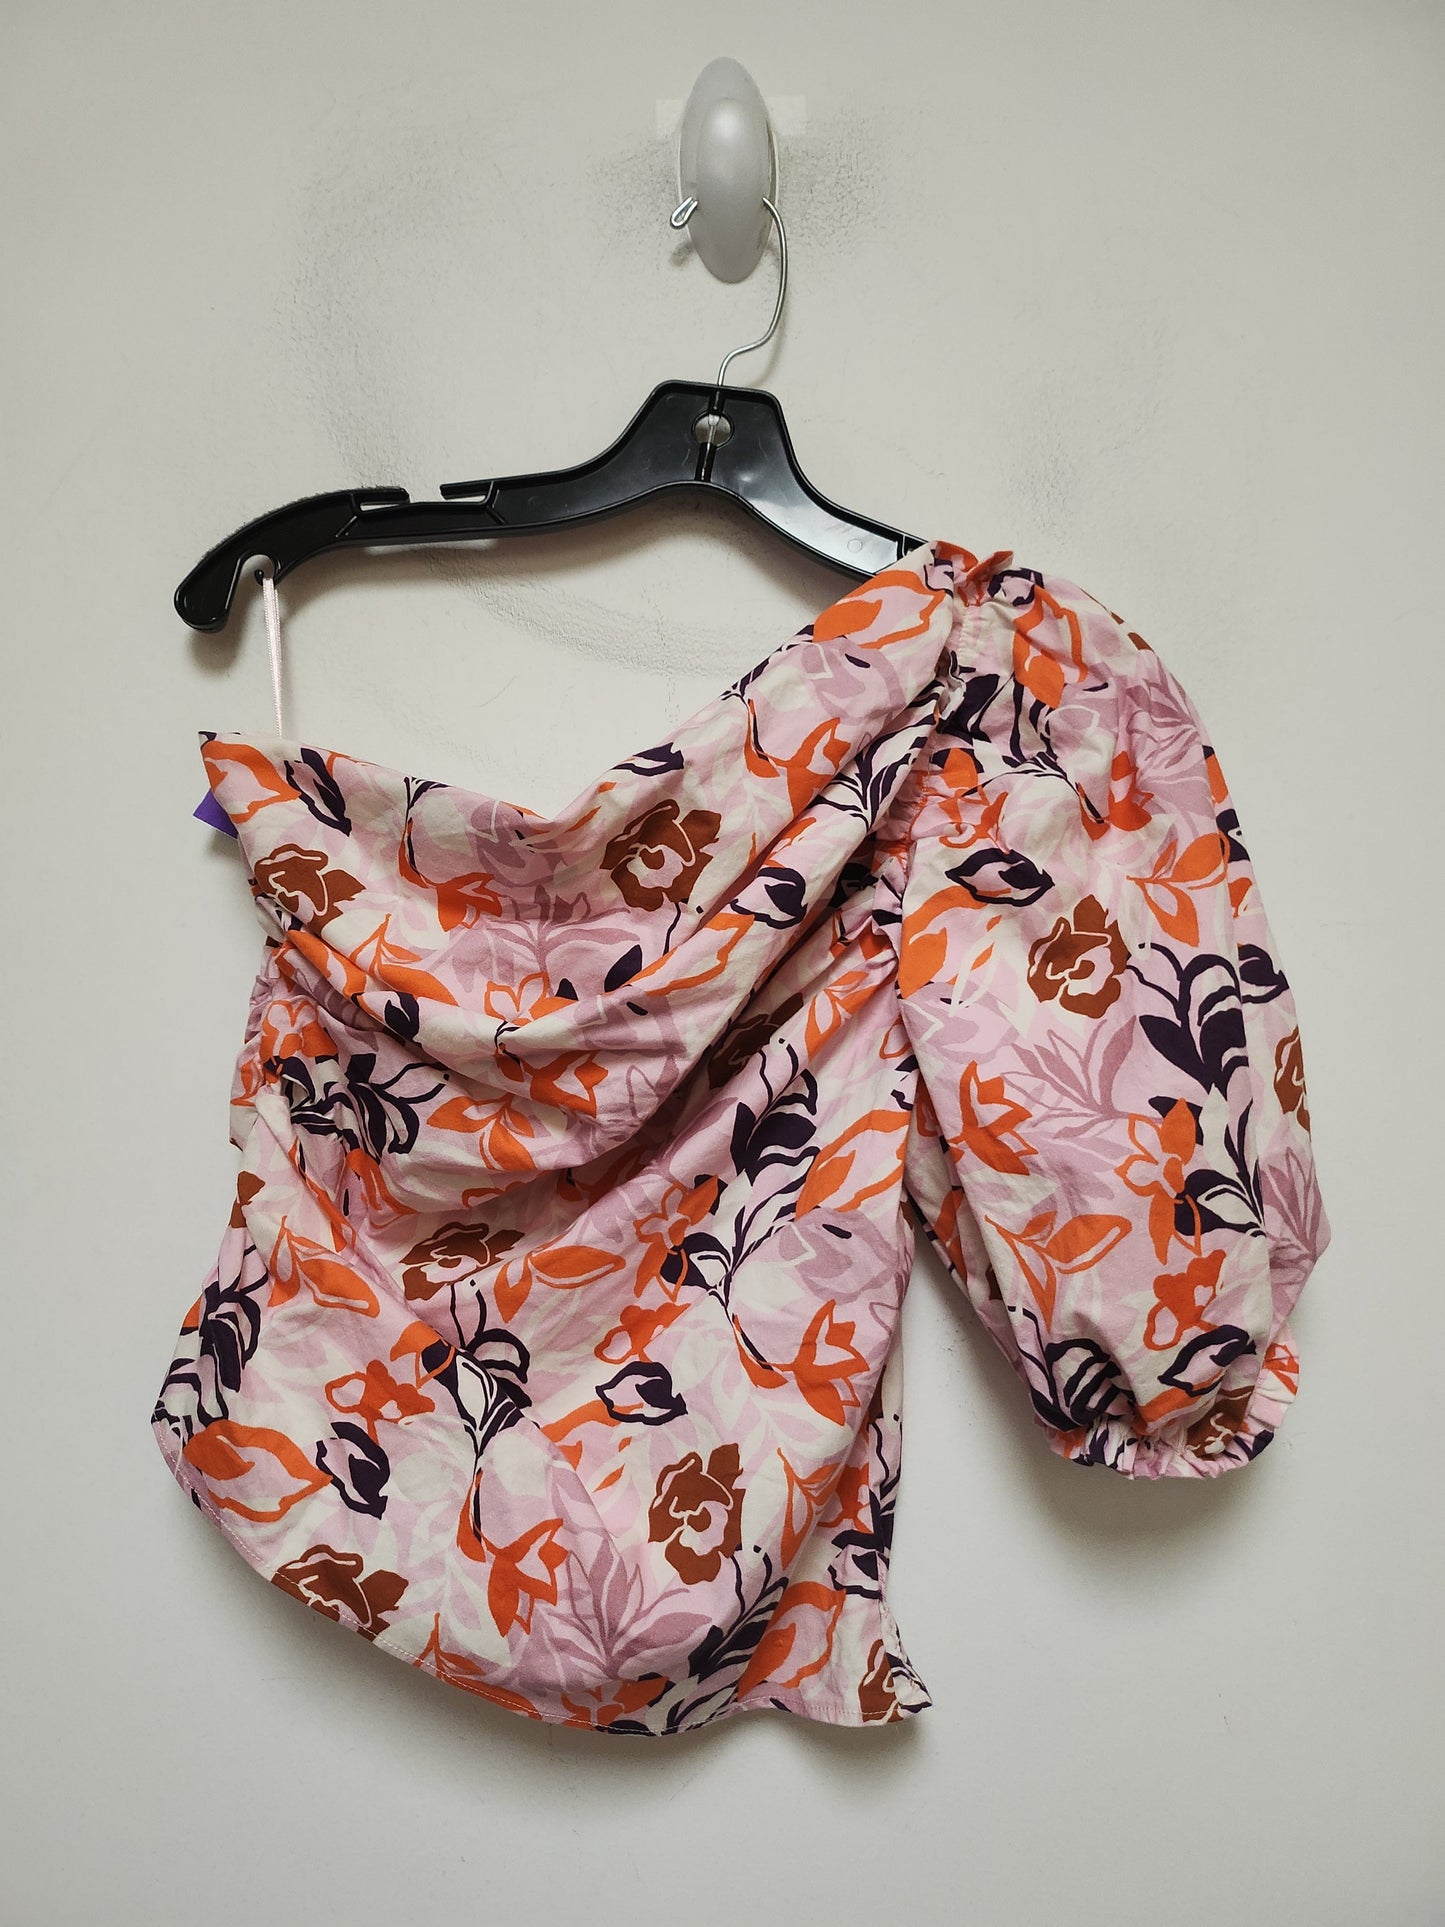 Floral Print Top Sleeveless Maeve, Size M